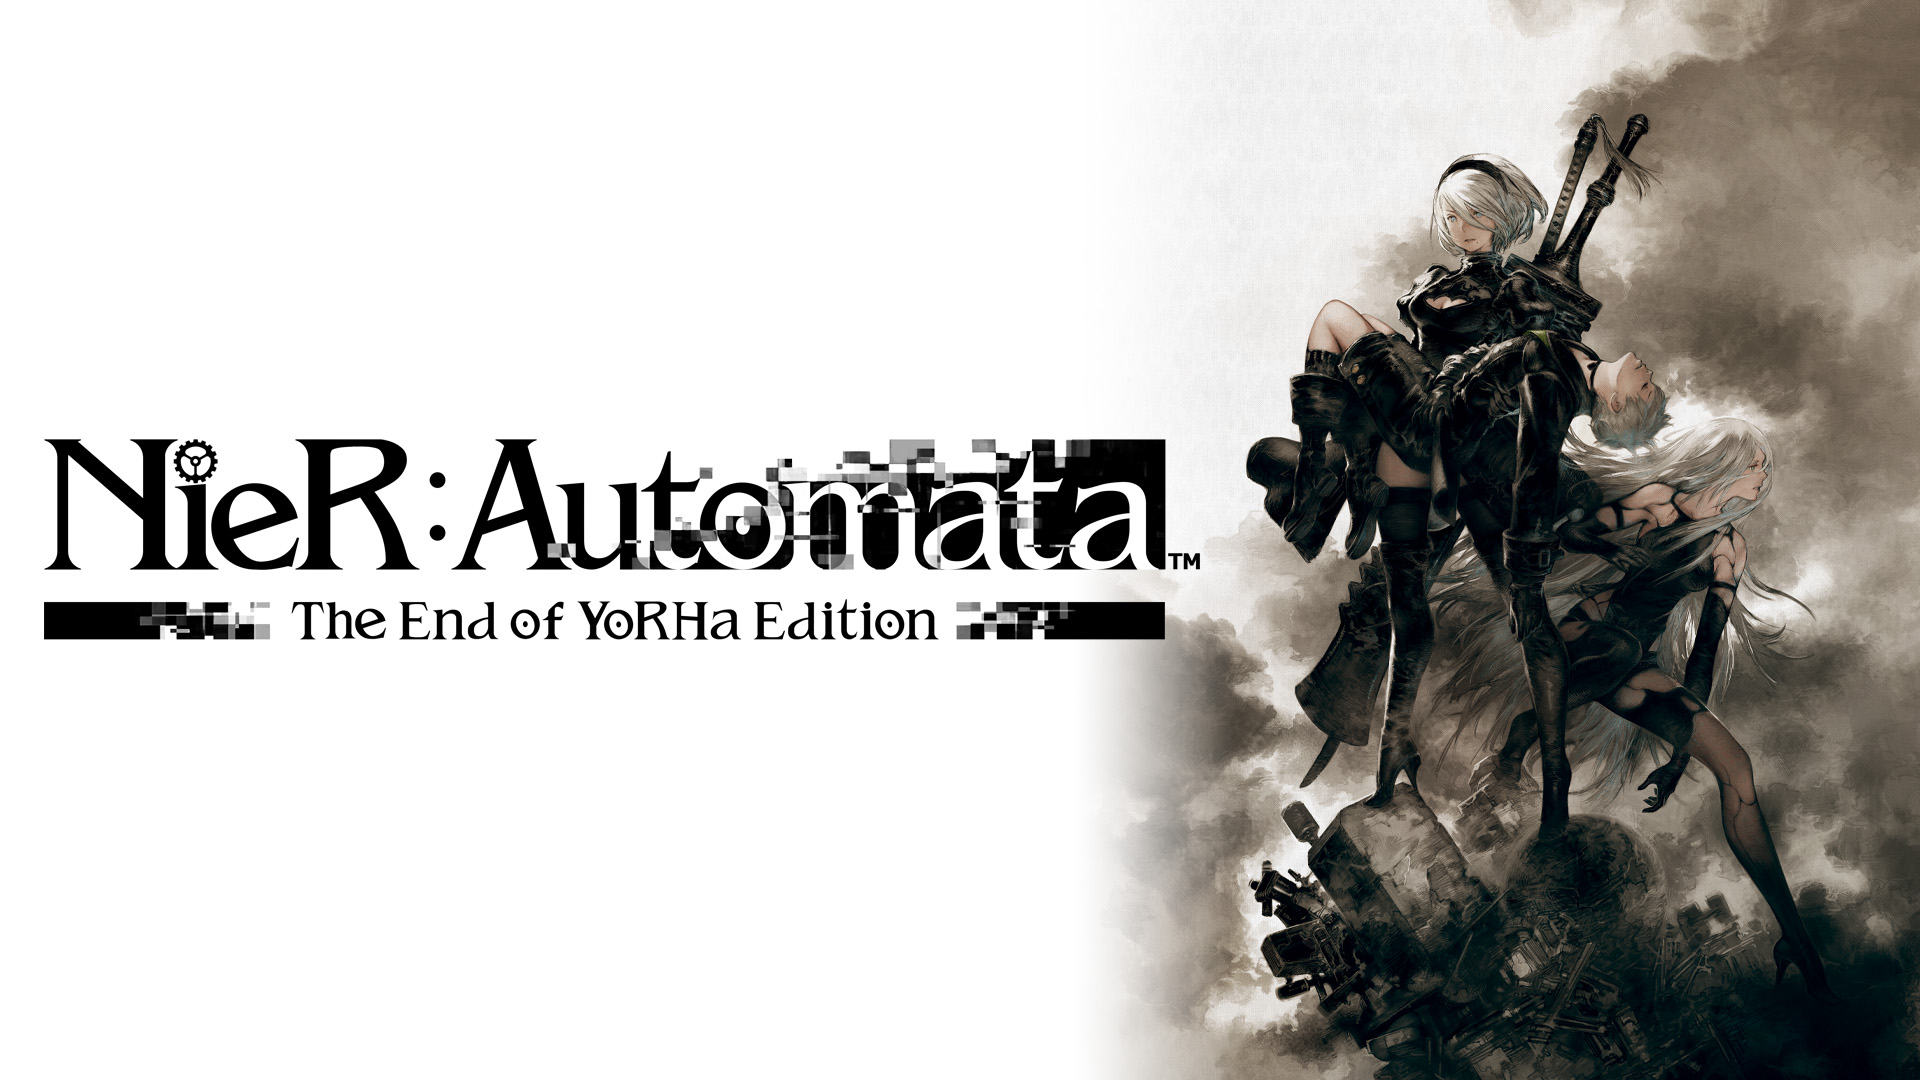 NieR:Automata - The End of YoRHa Edition -Nintendo Switch Game